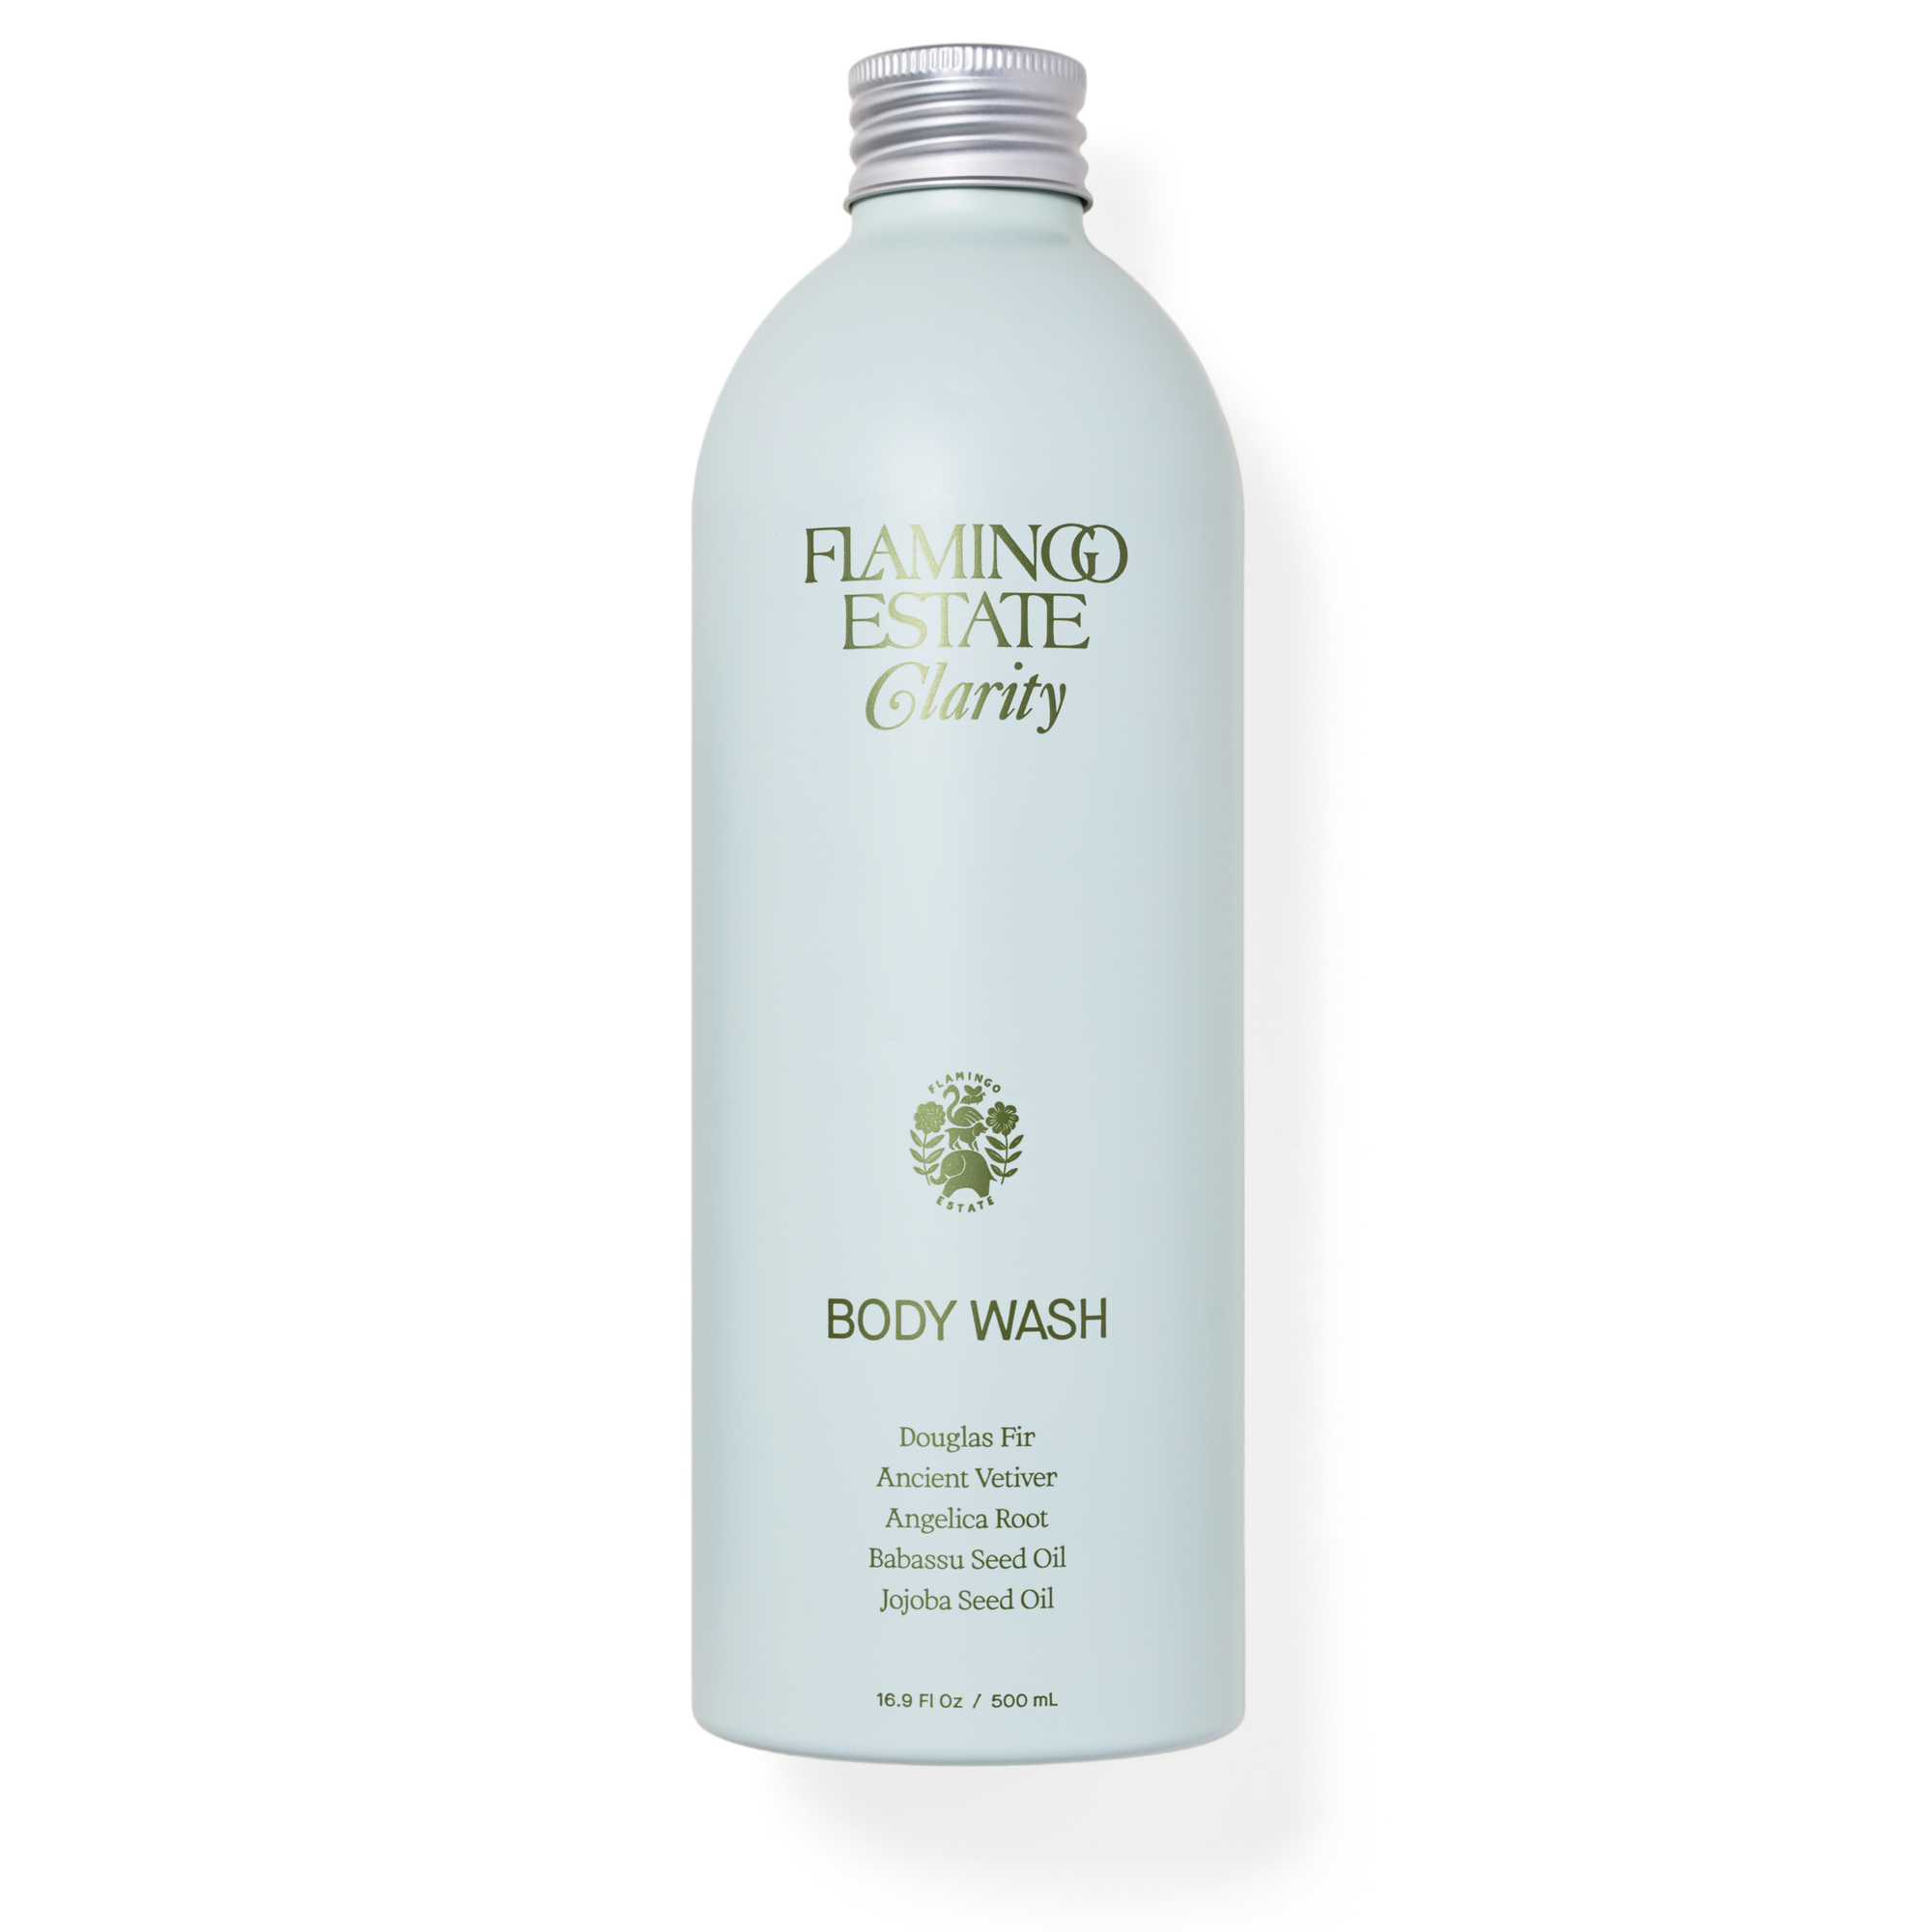 Flamingo Estate Peppermint & Juniper Berry Body Wash made with douglas fir, ancient vetiver, angelica root, babassu seed oil, and jojoba seed oil. Comes in a light metal container.